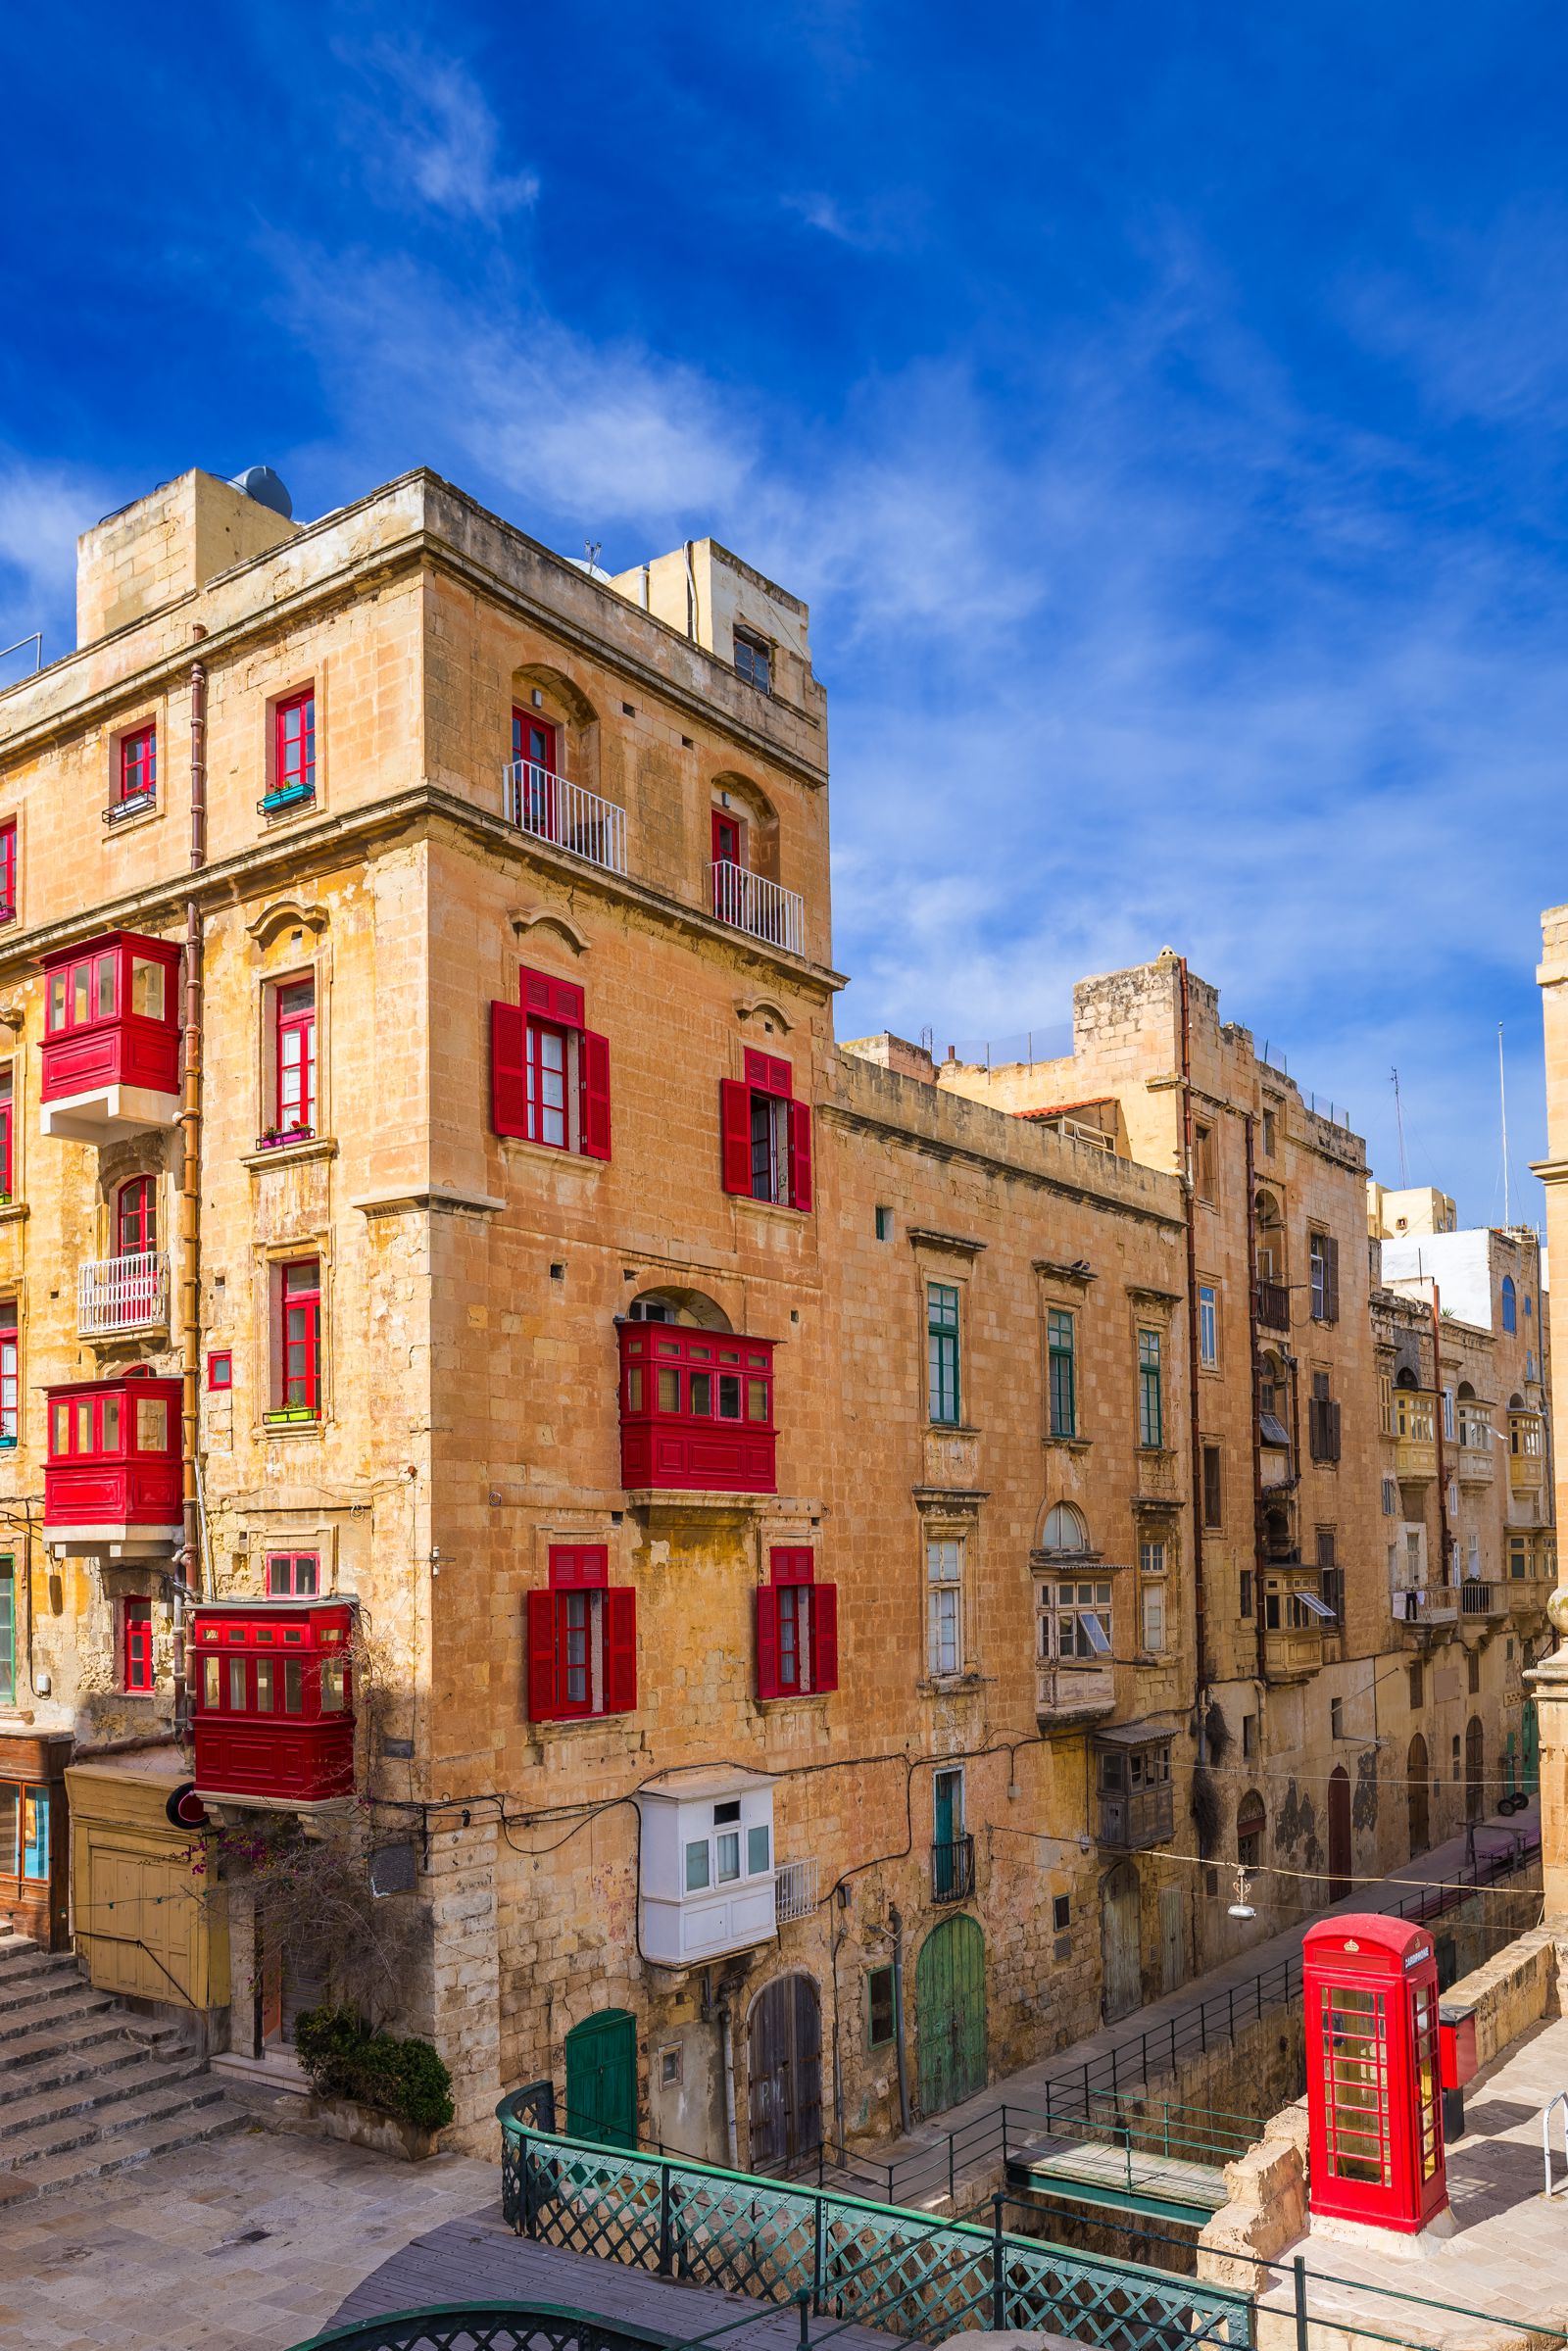 18 Incredible Things You Have To See And Do In Malta And Gozo (13)